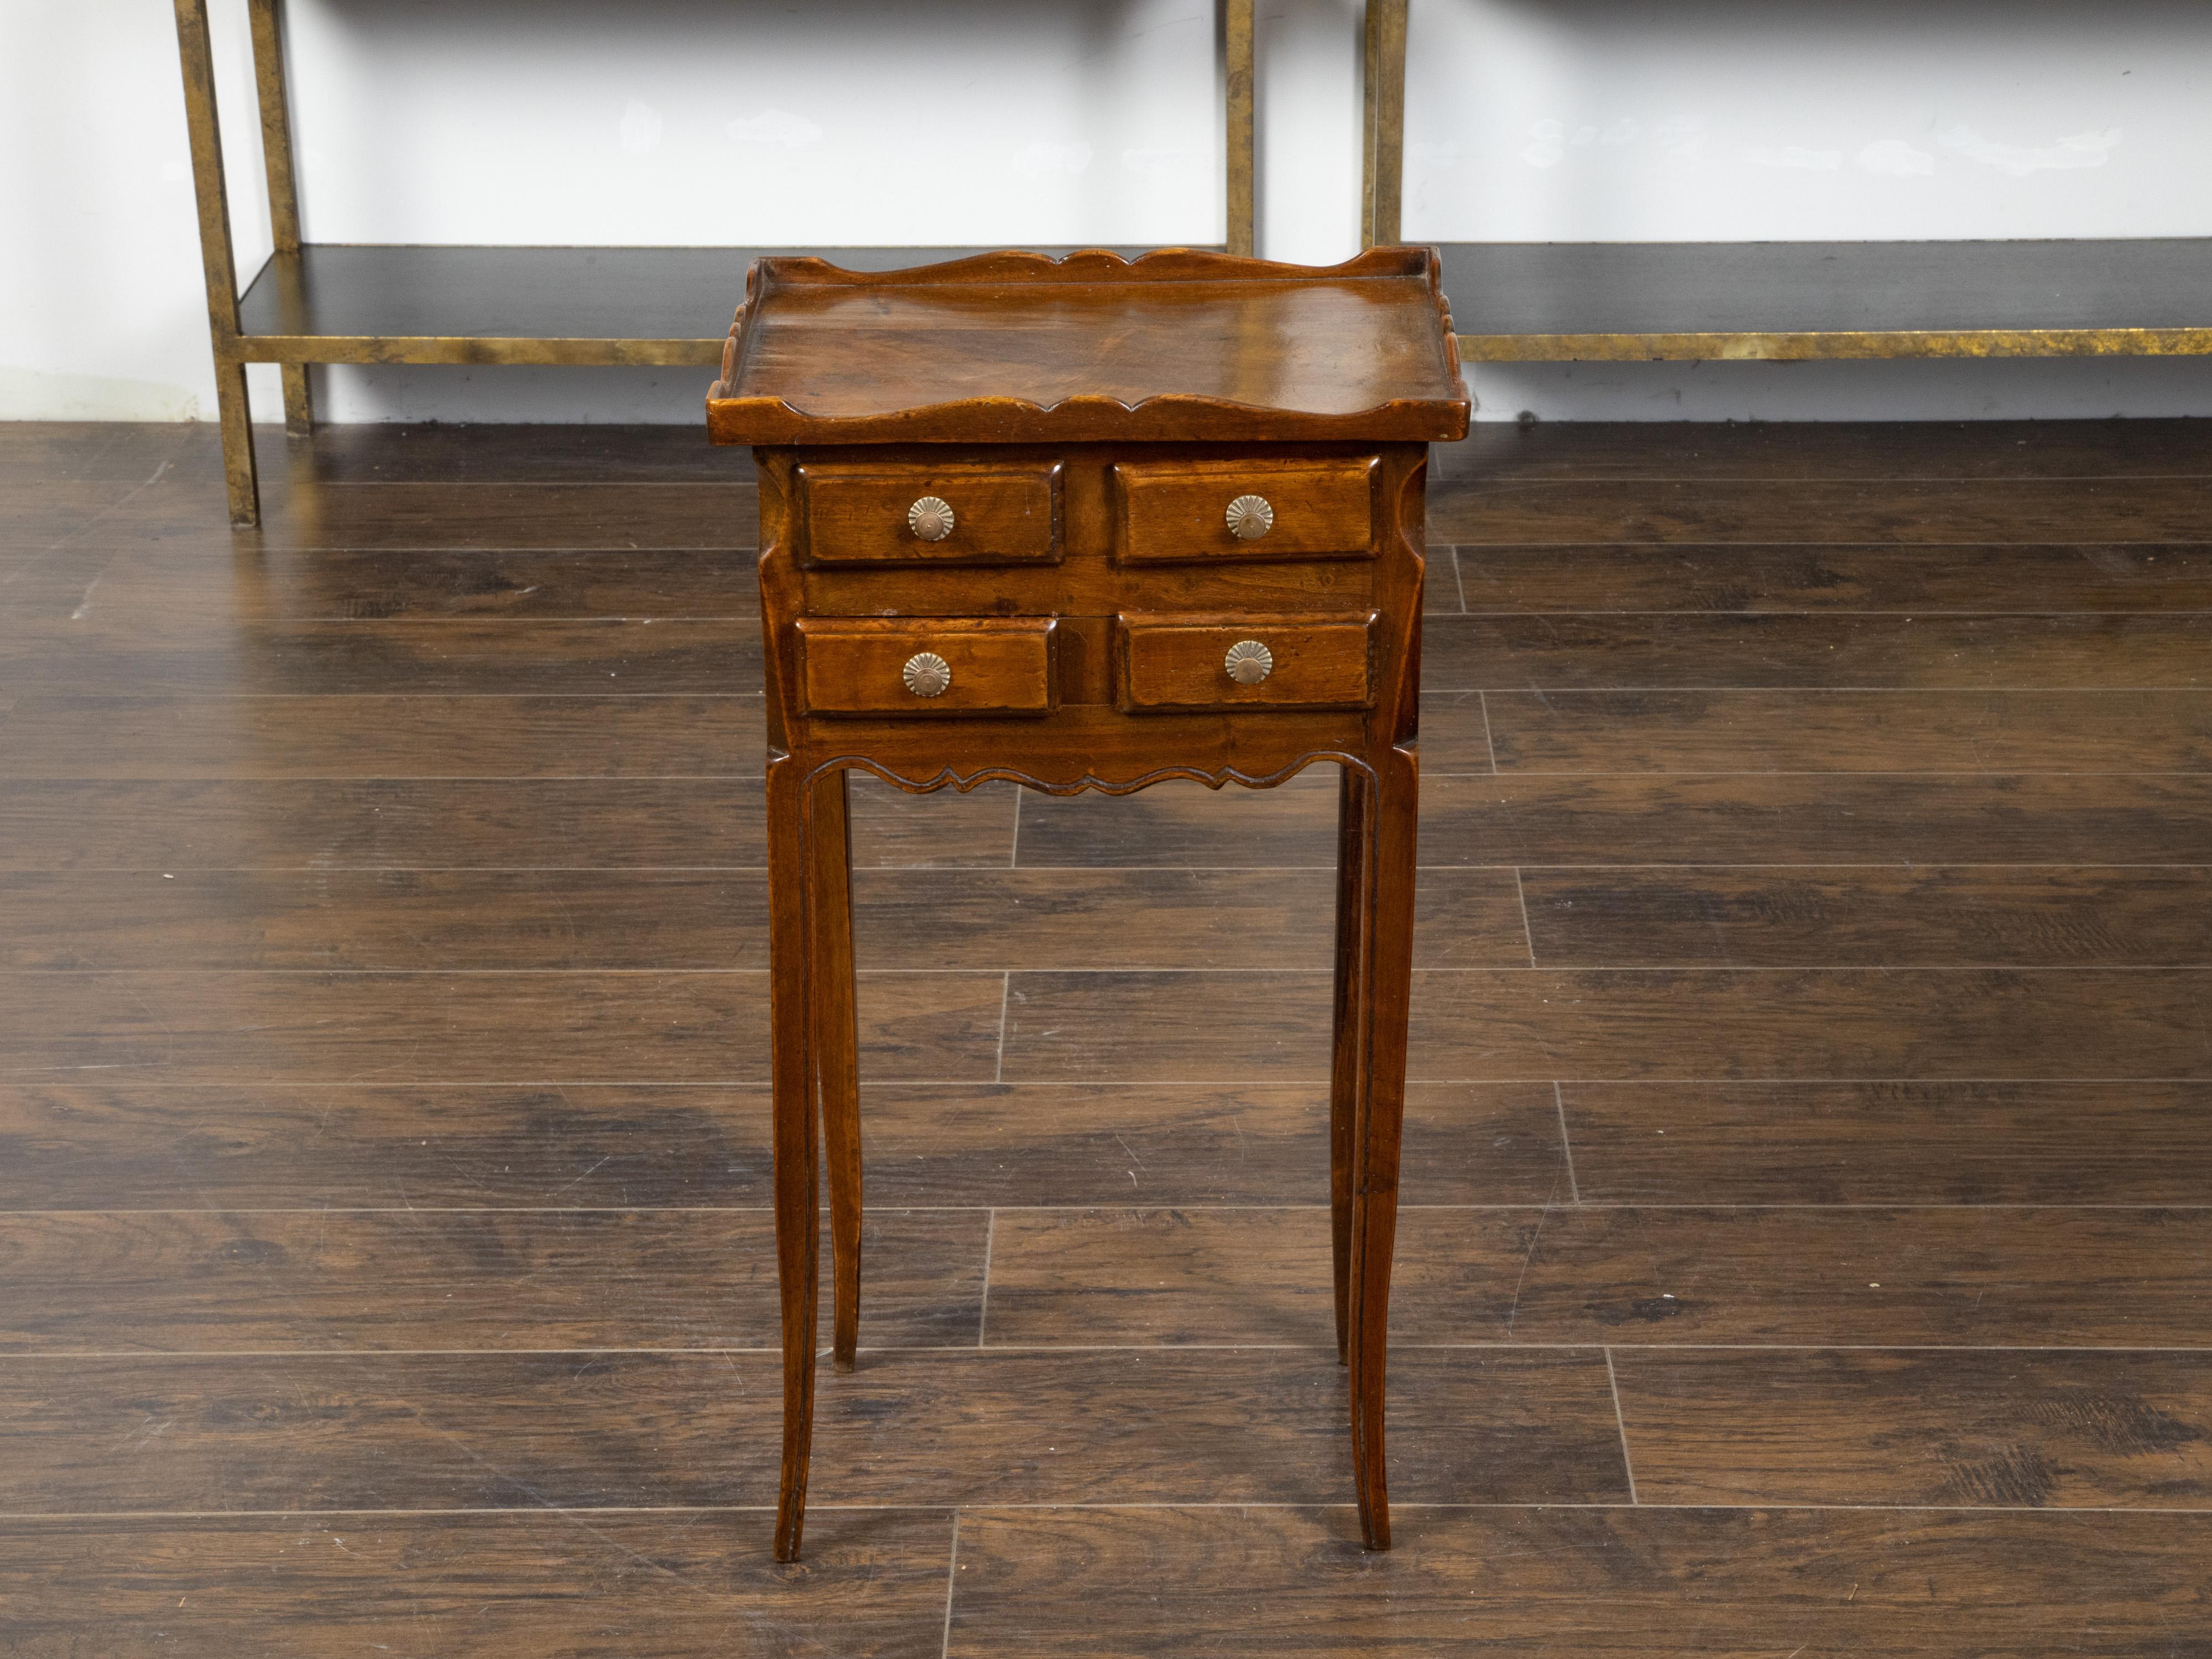 A French walnut side table from the early 20th century, with carved tray top and four small drawers. Created in France during the Turn of the Century, this walnut side table features a rectangular carved tray top sitting above four small drawers